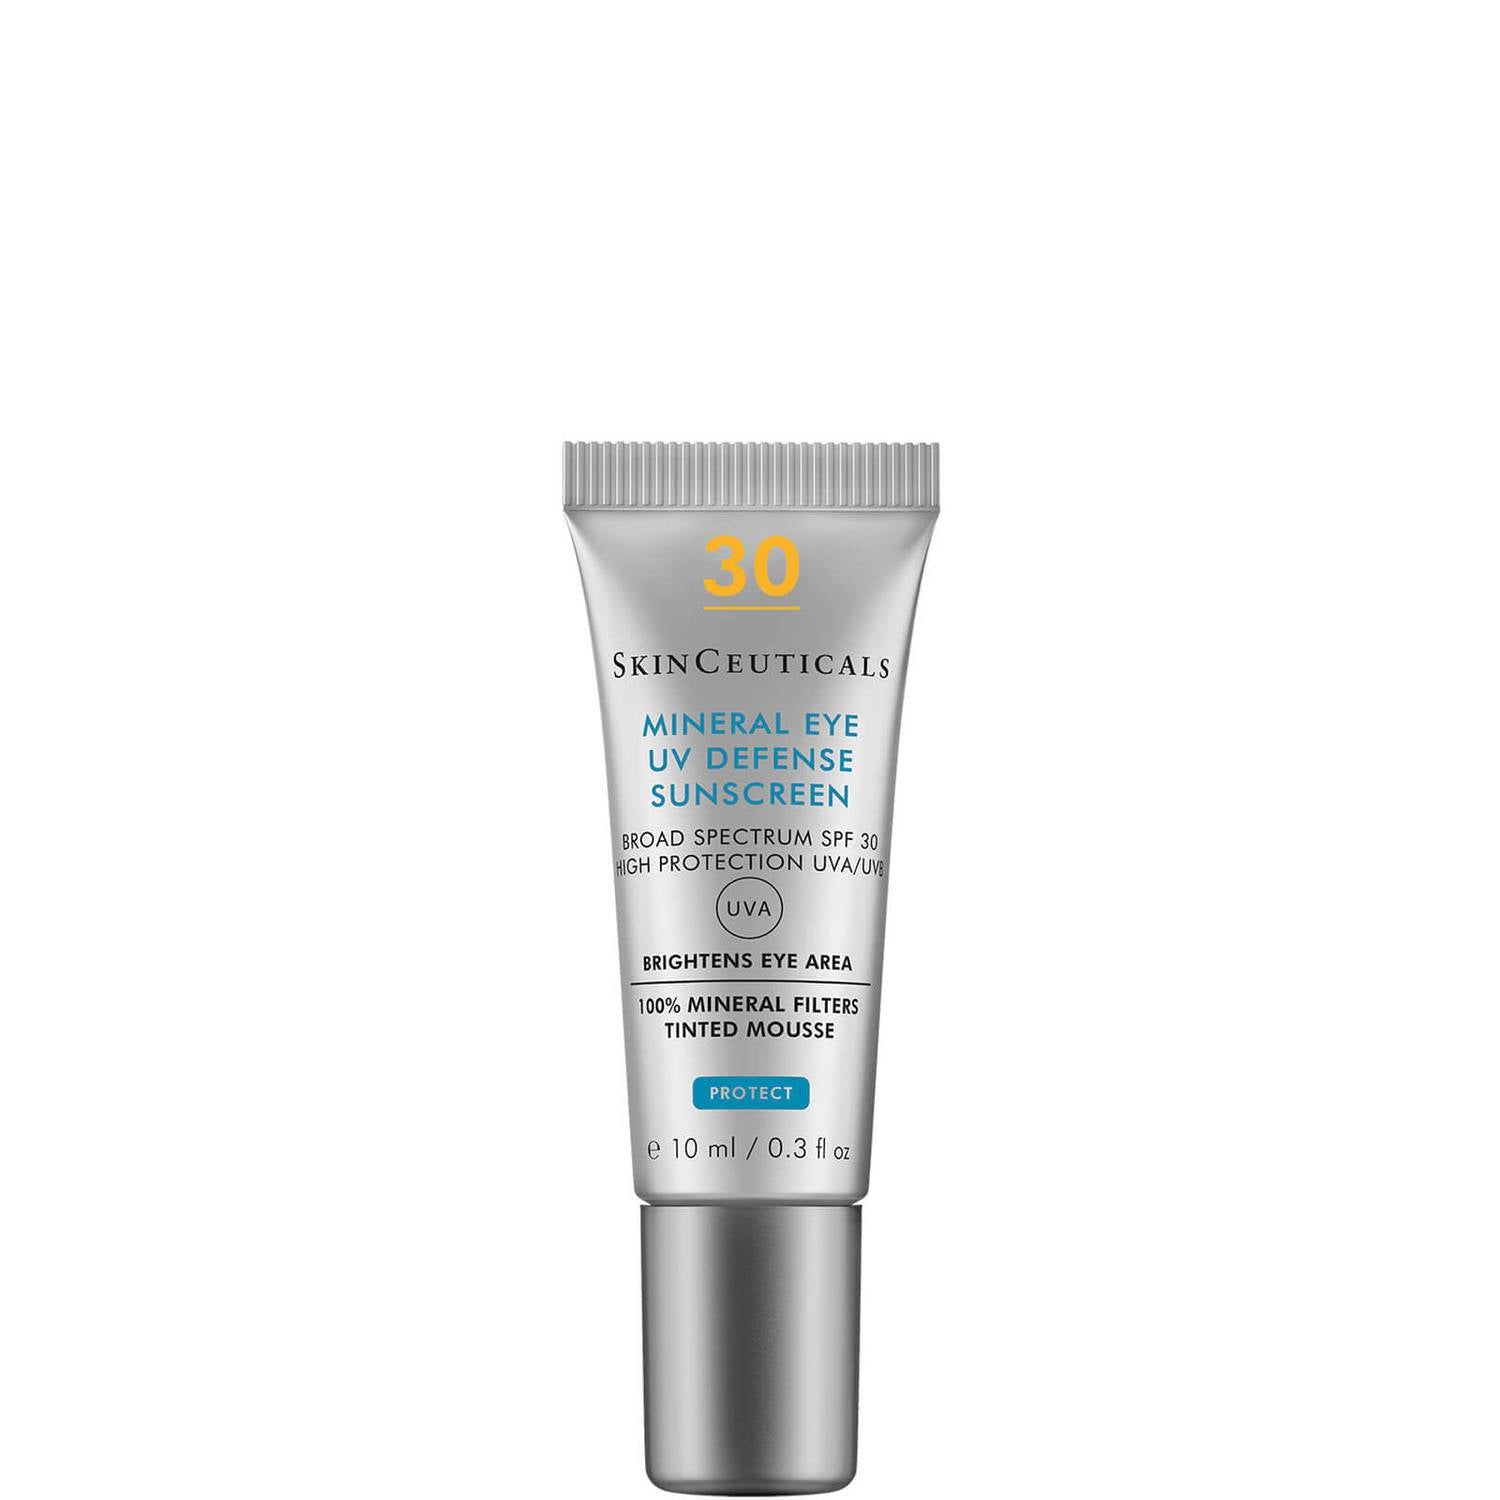 SkinCeuticals Mineral Eye UV Defense SPF 30 Sunscreen Protection 10ml